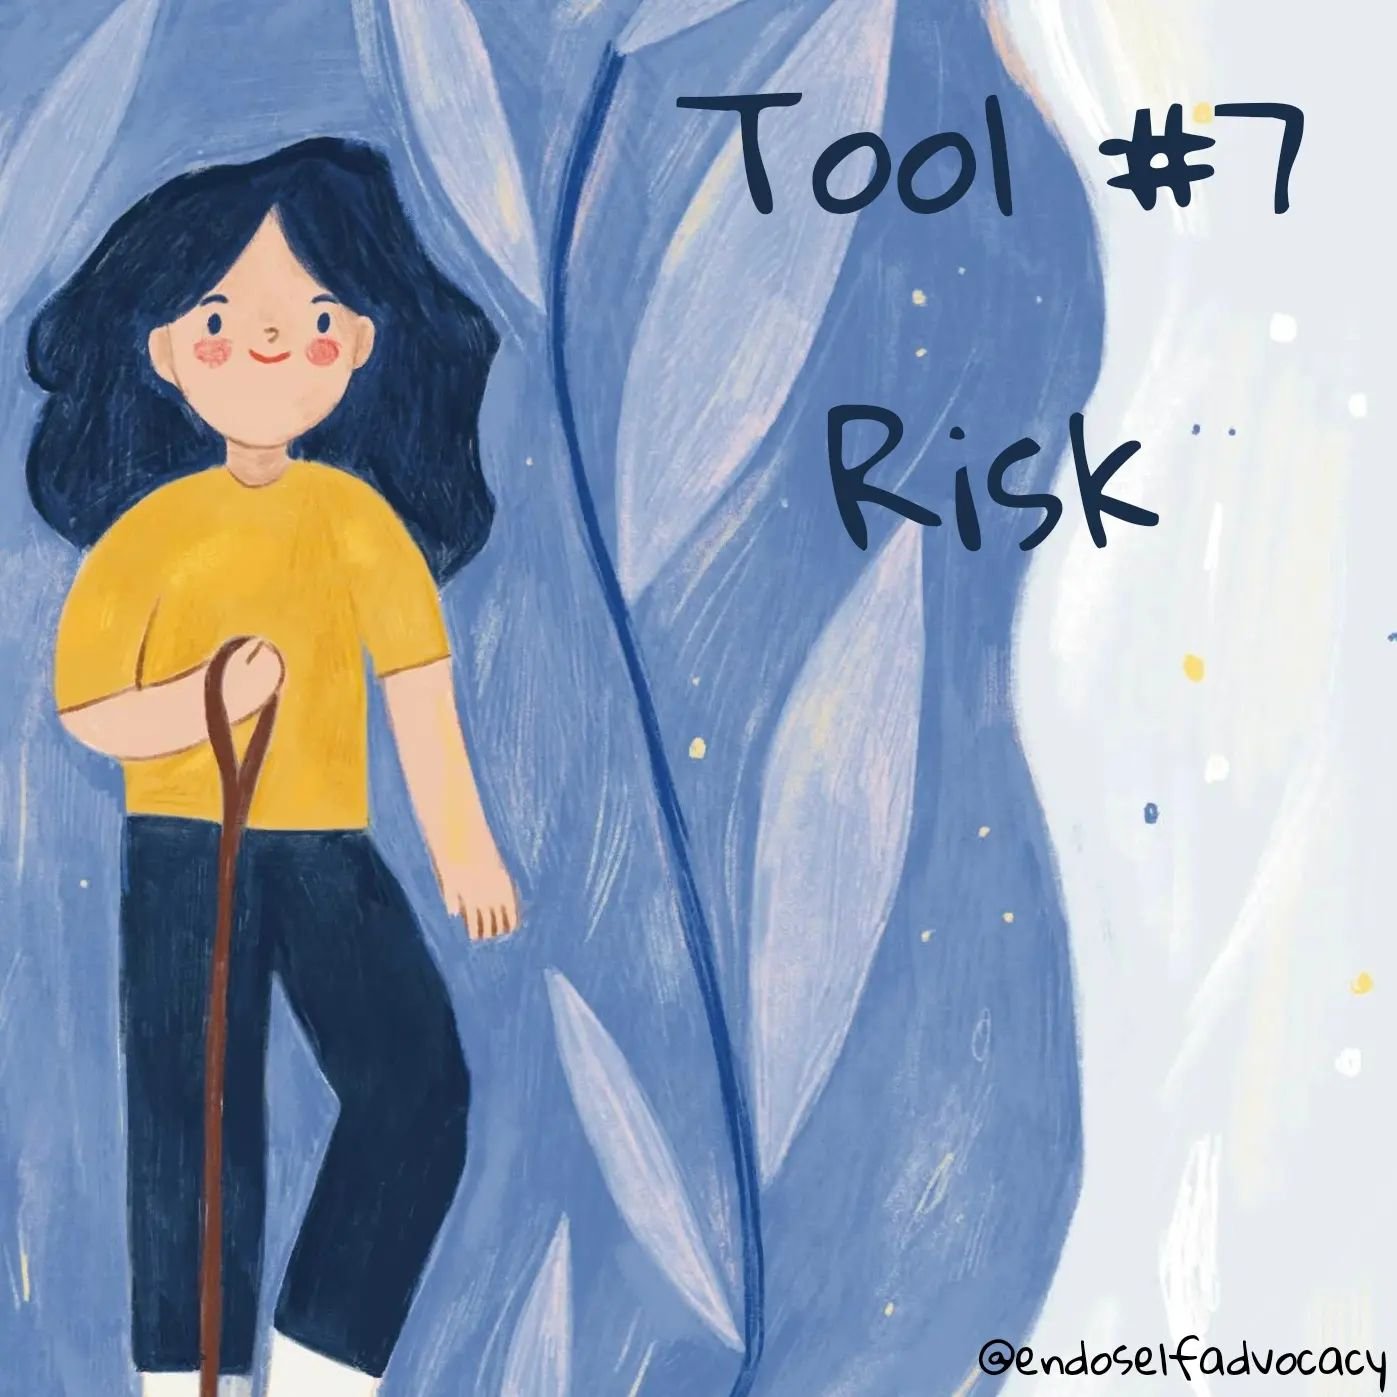 Living with endometriosis means navigating risks every day, from medication to surgery. 

🩺💊 Take charge of your health by identifying risks and practicing ongoing evaluation, management, and control. 

 #EndometriosisAwareness #SelfAdvocacy #Healt